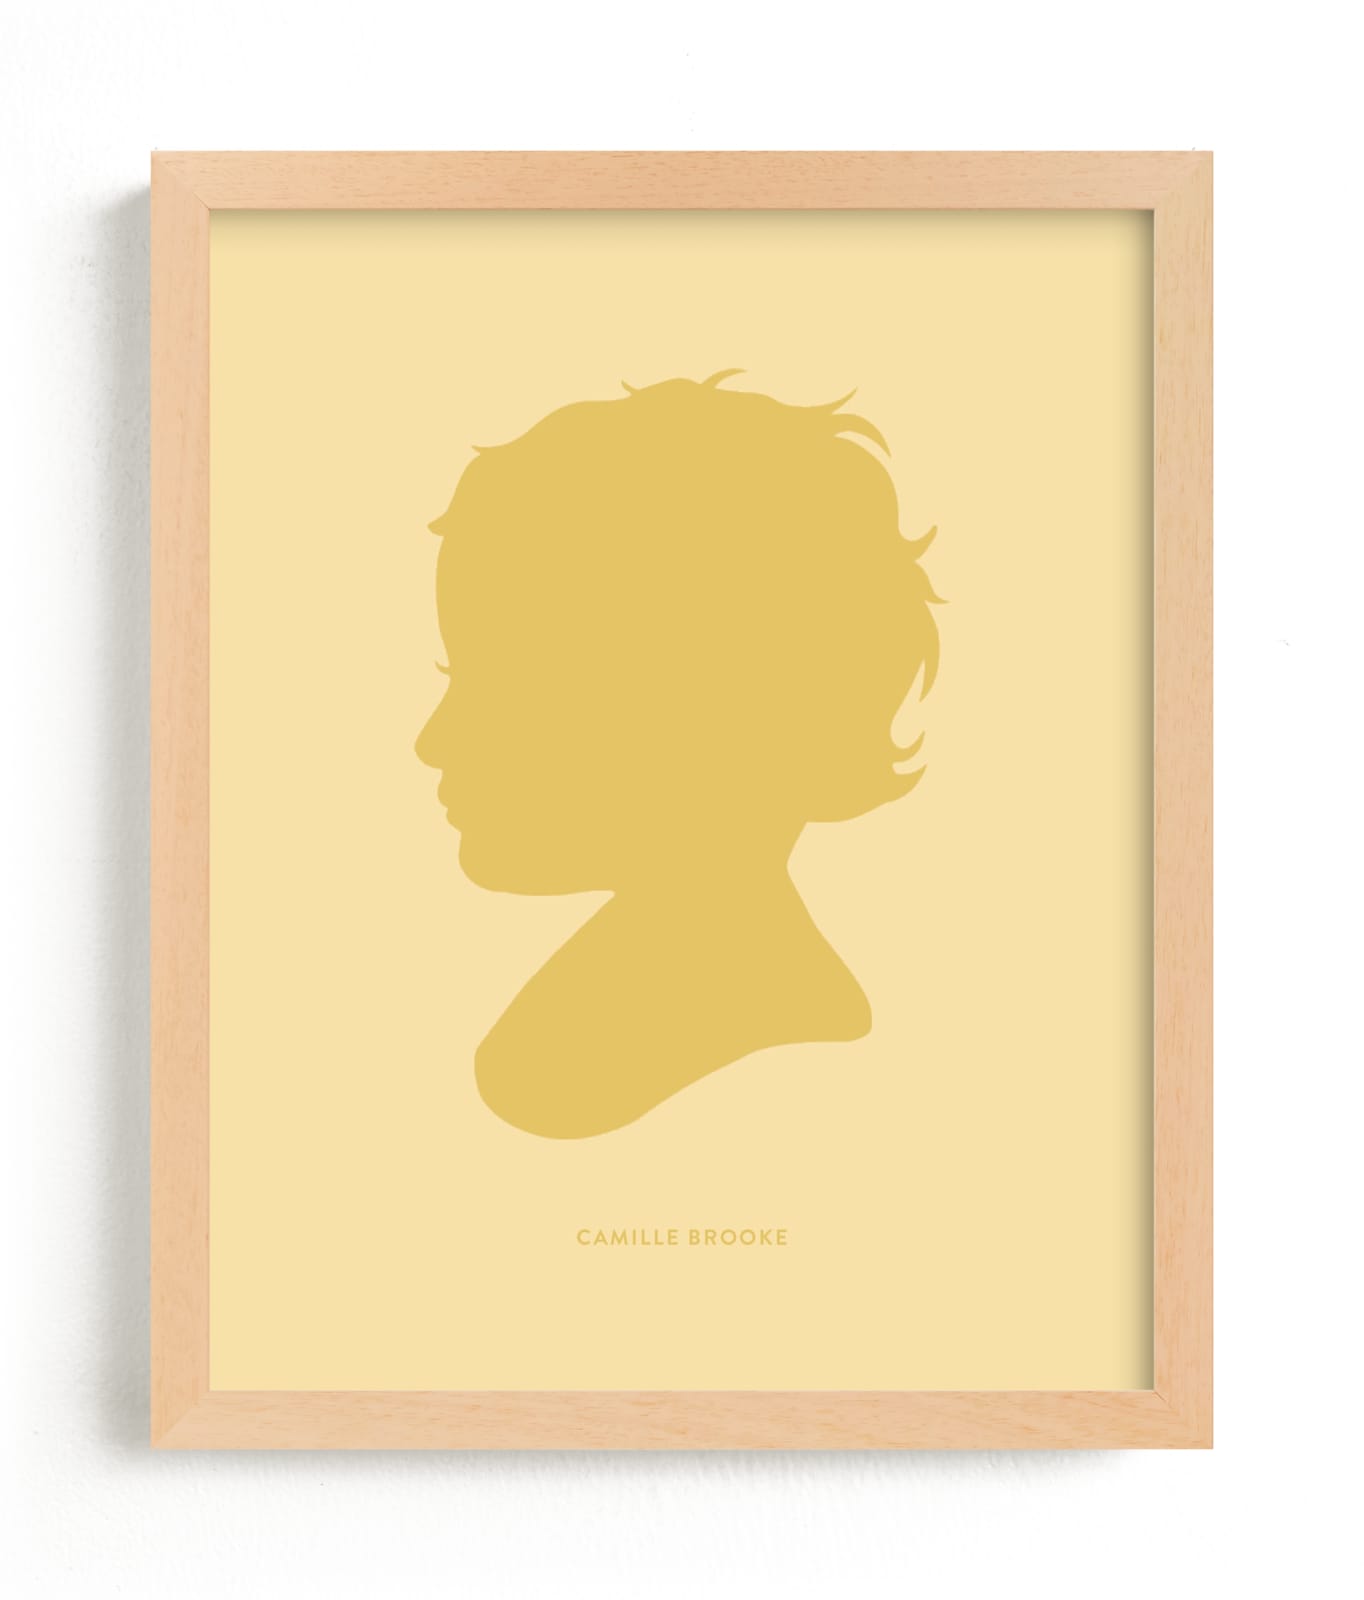 This is a colorful, yellow silhouette art by Minted called Tone on Tone Silhouette.